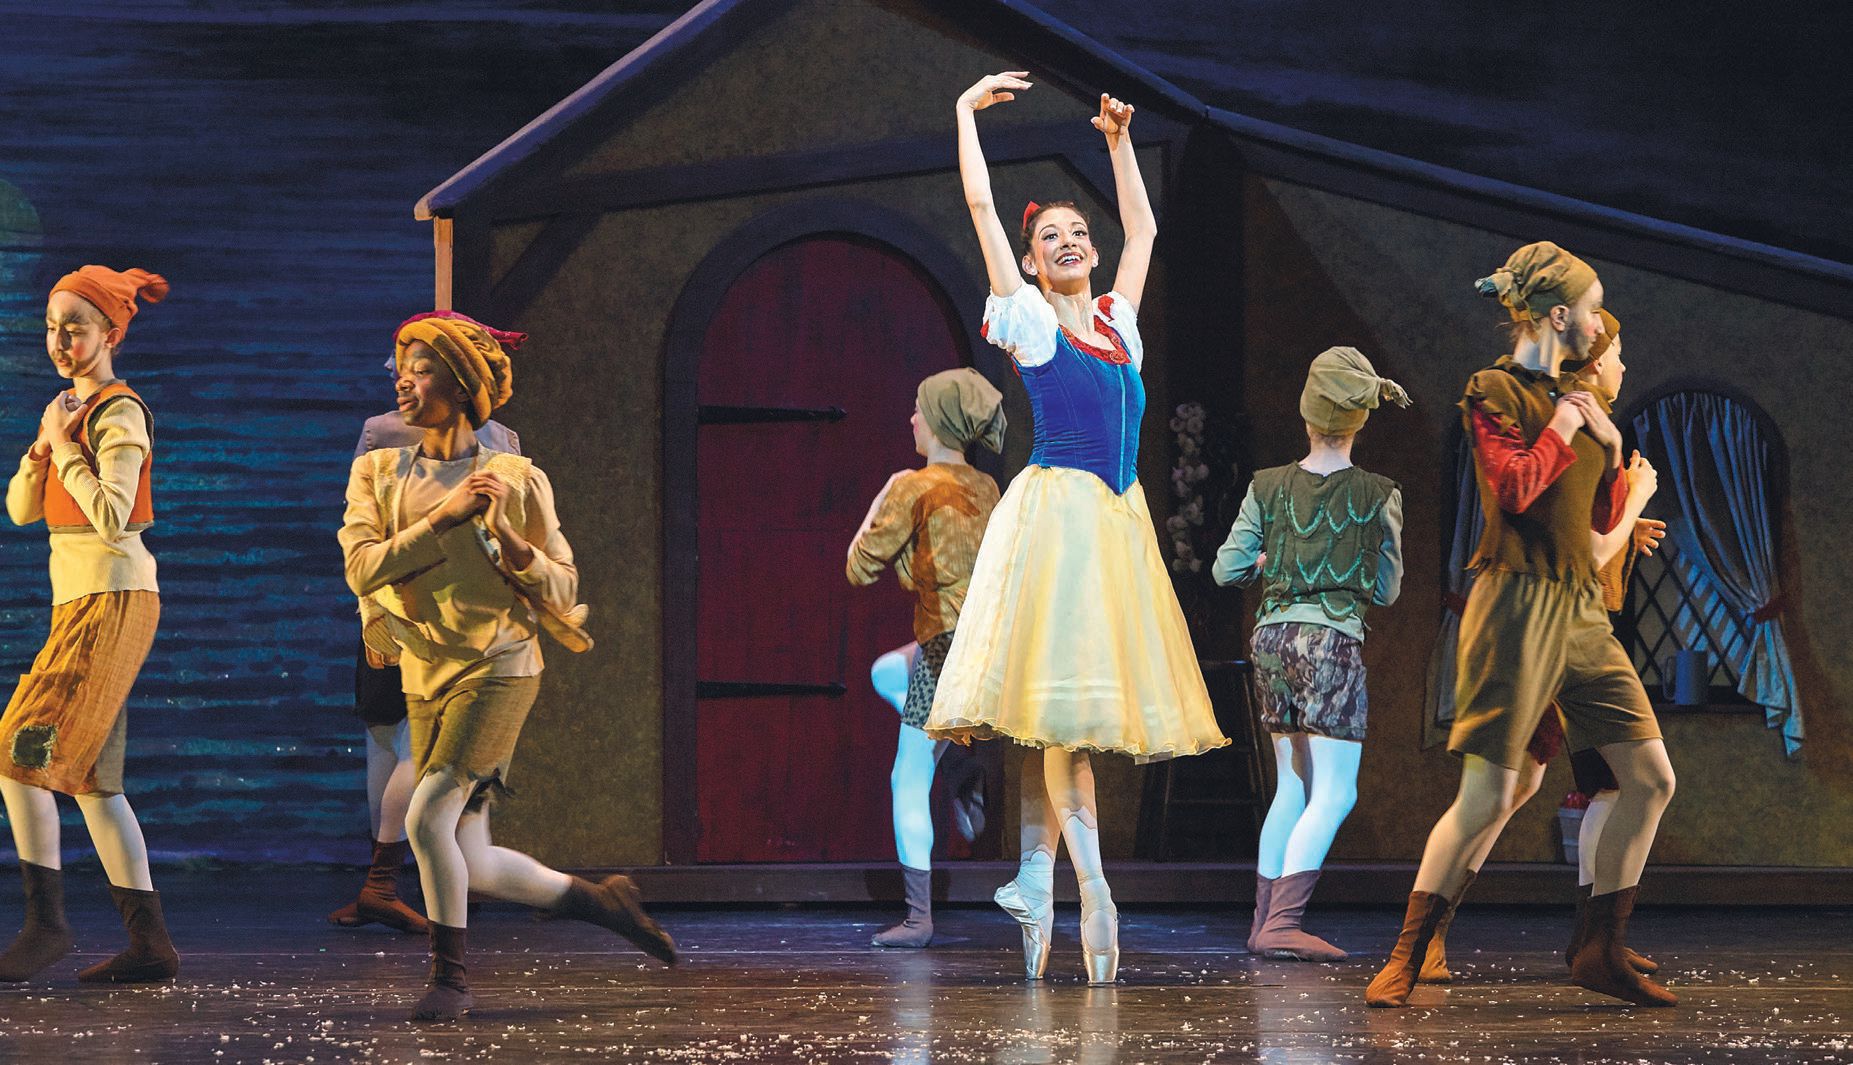 Atlanta Ballet 2’s Snow White performance runs perfectly at one hour, making it an ideal cultural outing for the kiddos. PHOTO BY KIM KENNEY